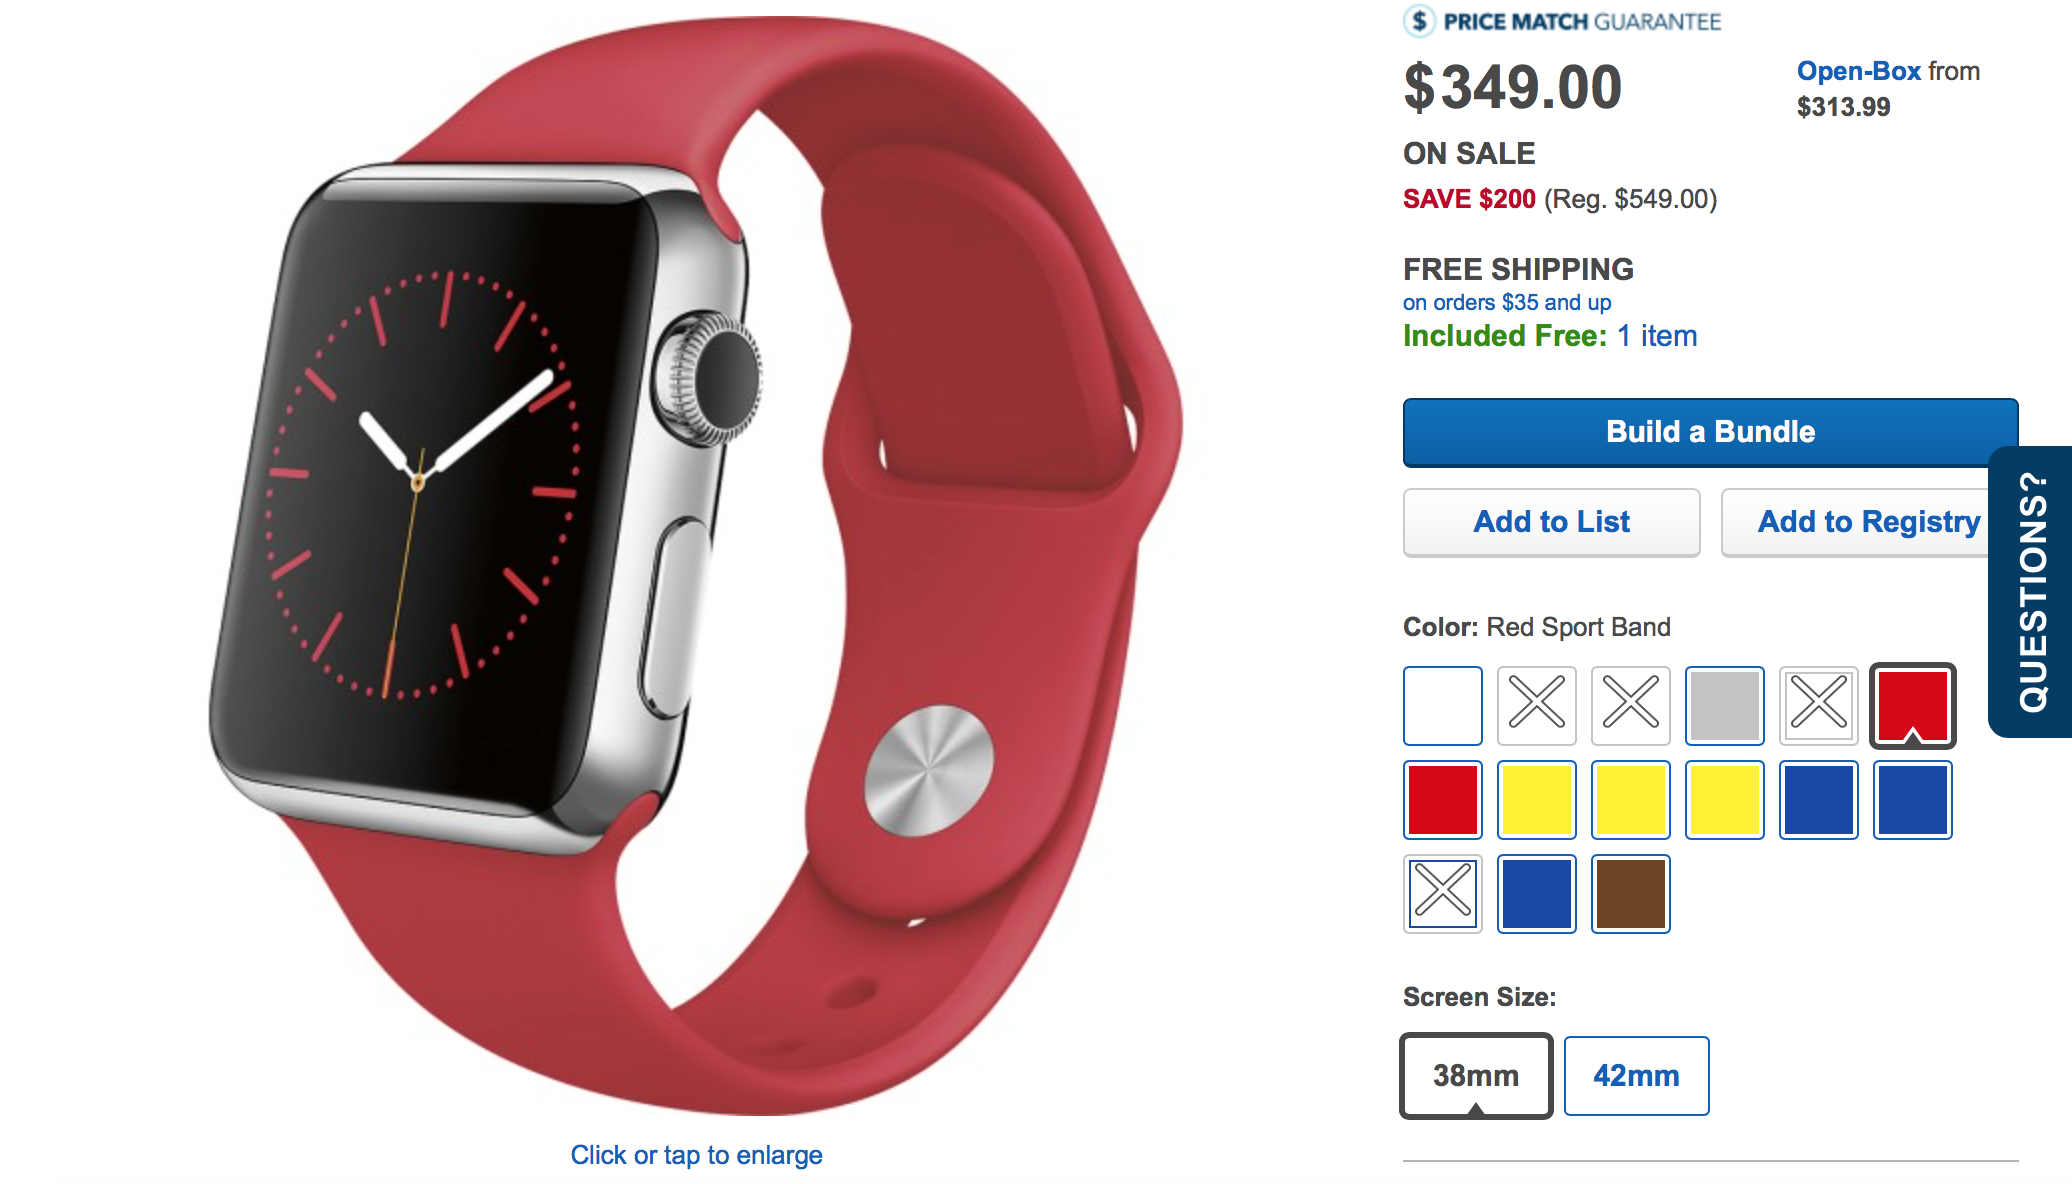 Get a Stainless Steel Apple Watch on Sale for $349